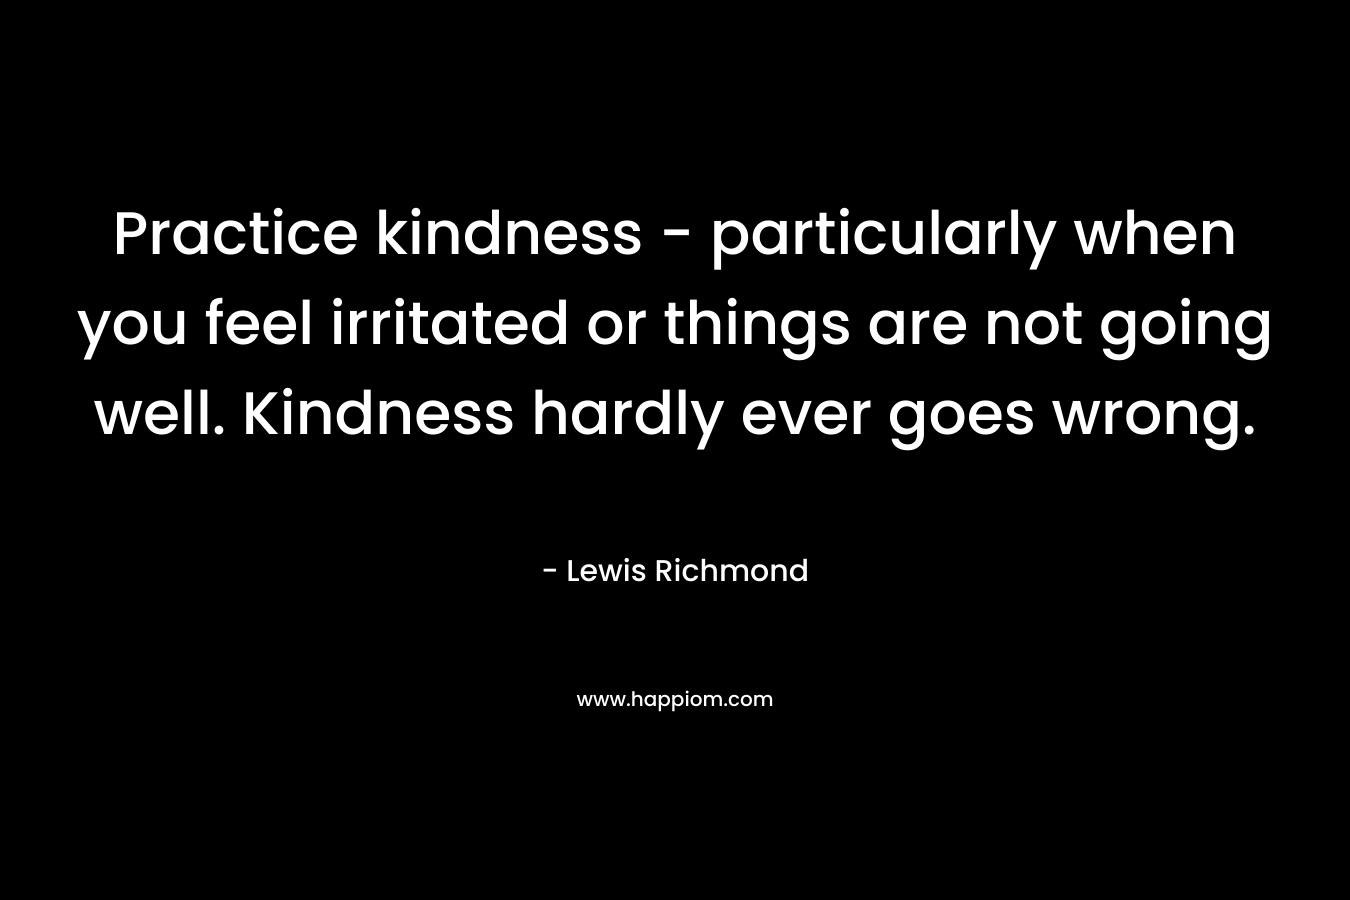 Practice kindness - particularly when you feel irritated or things are not going well. Kindness hardly ever goes wrong.